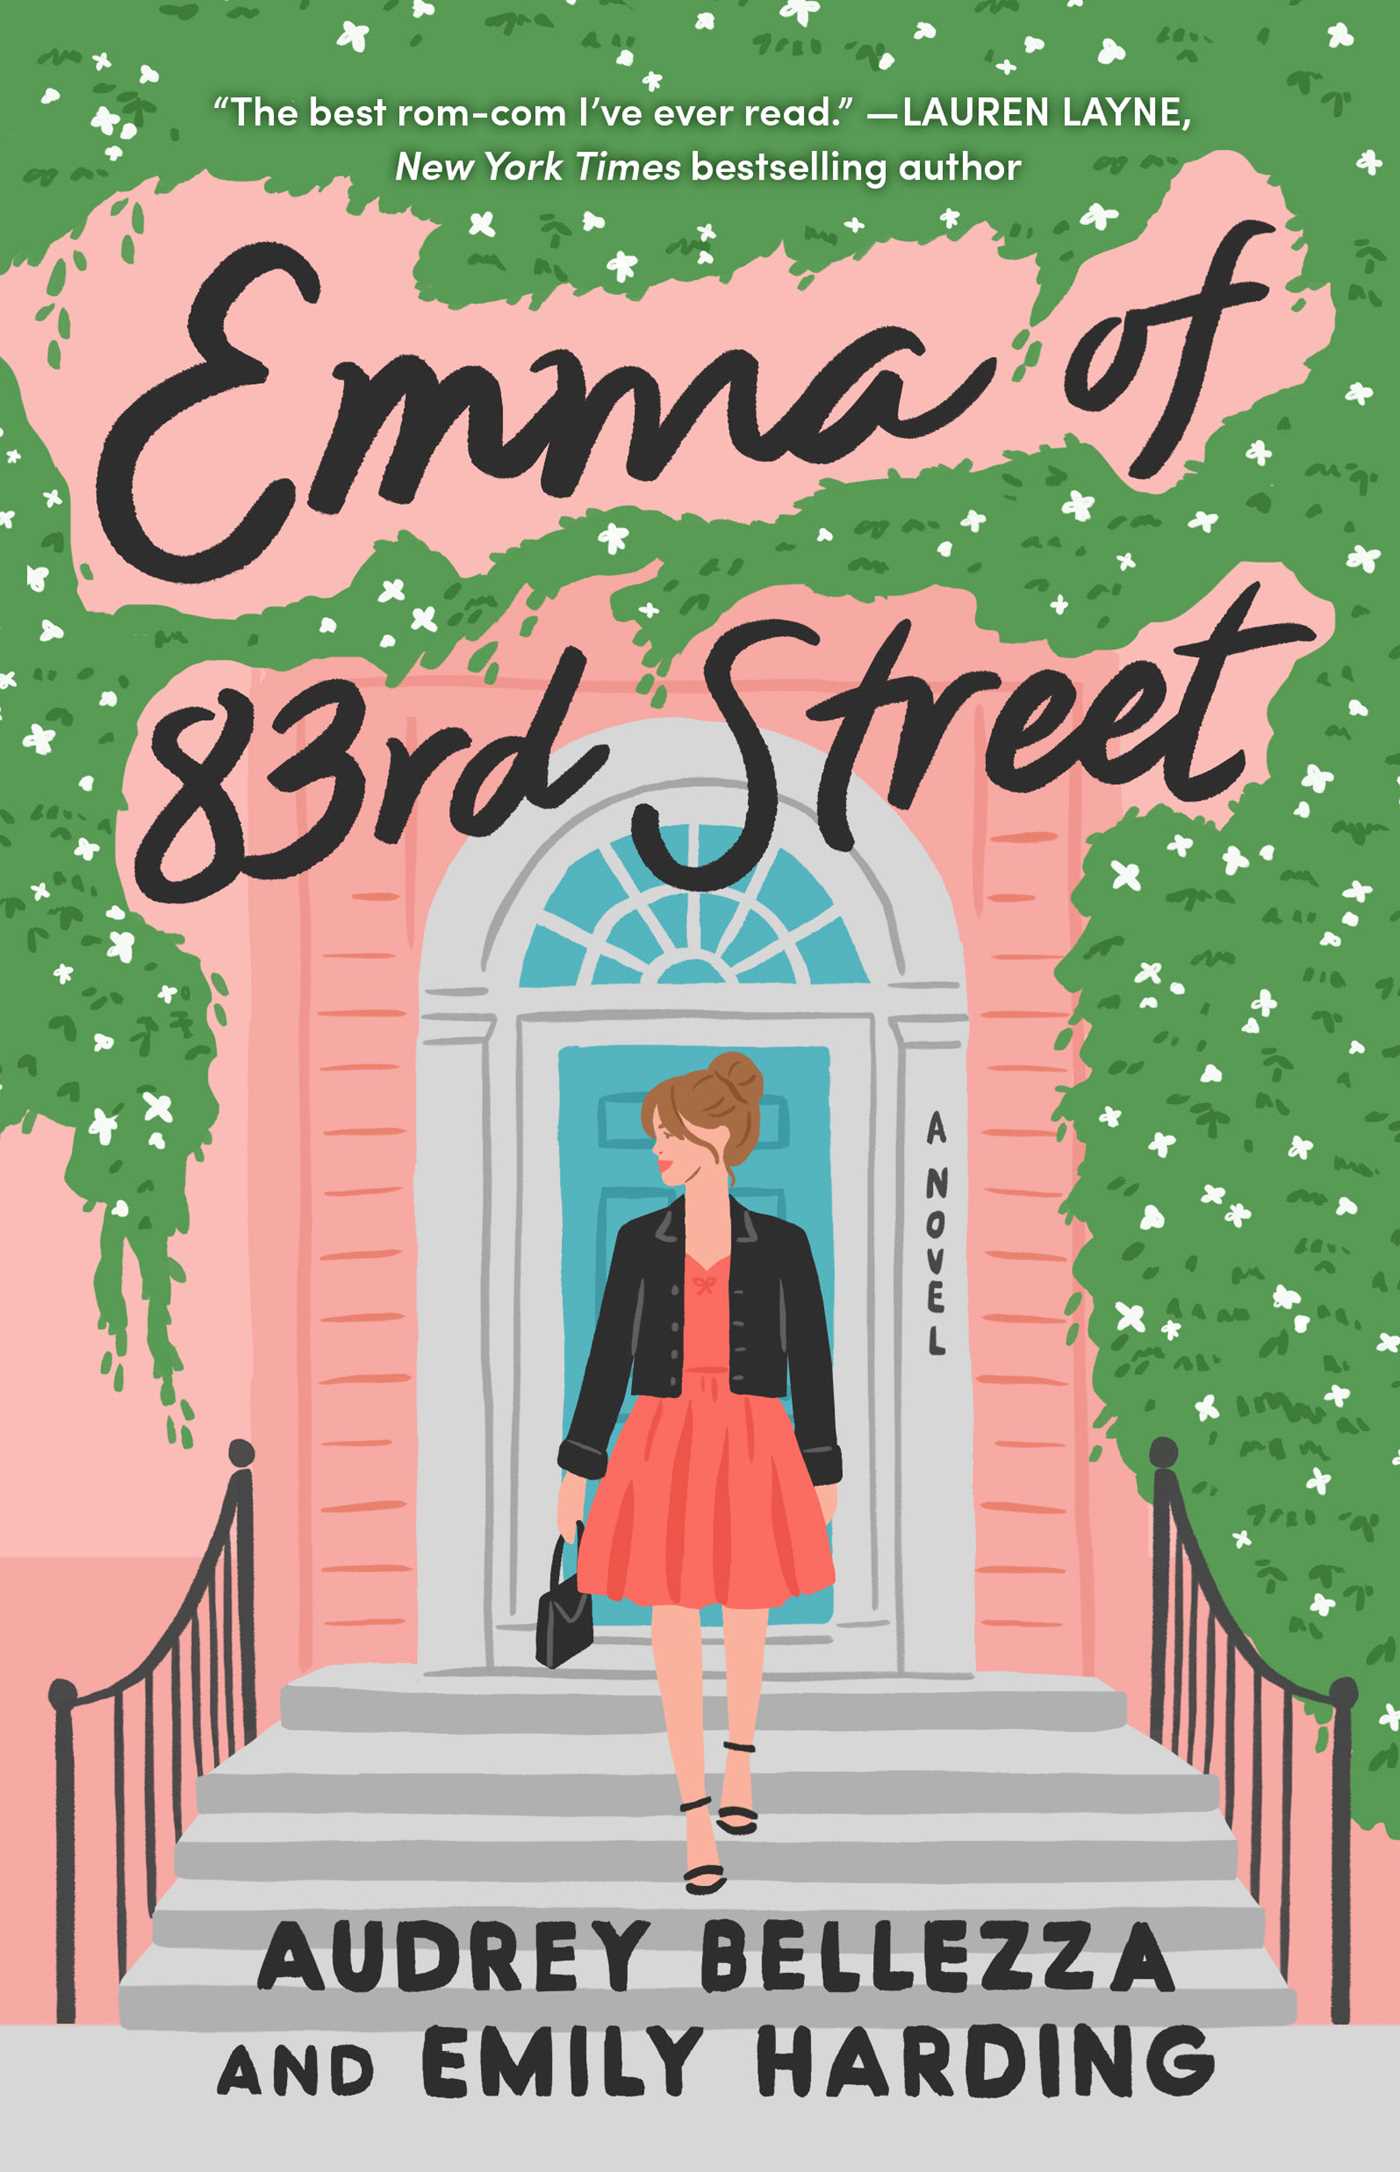 Image for "Emma of 83rd Street"